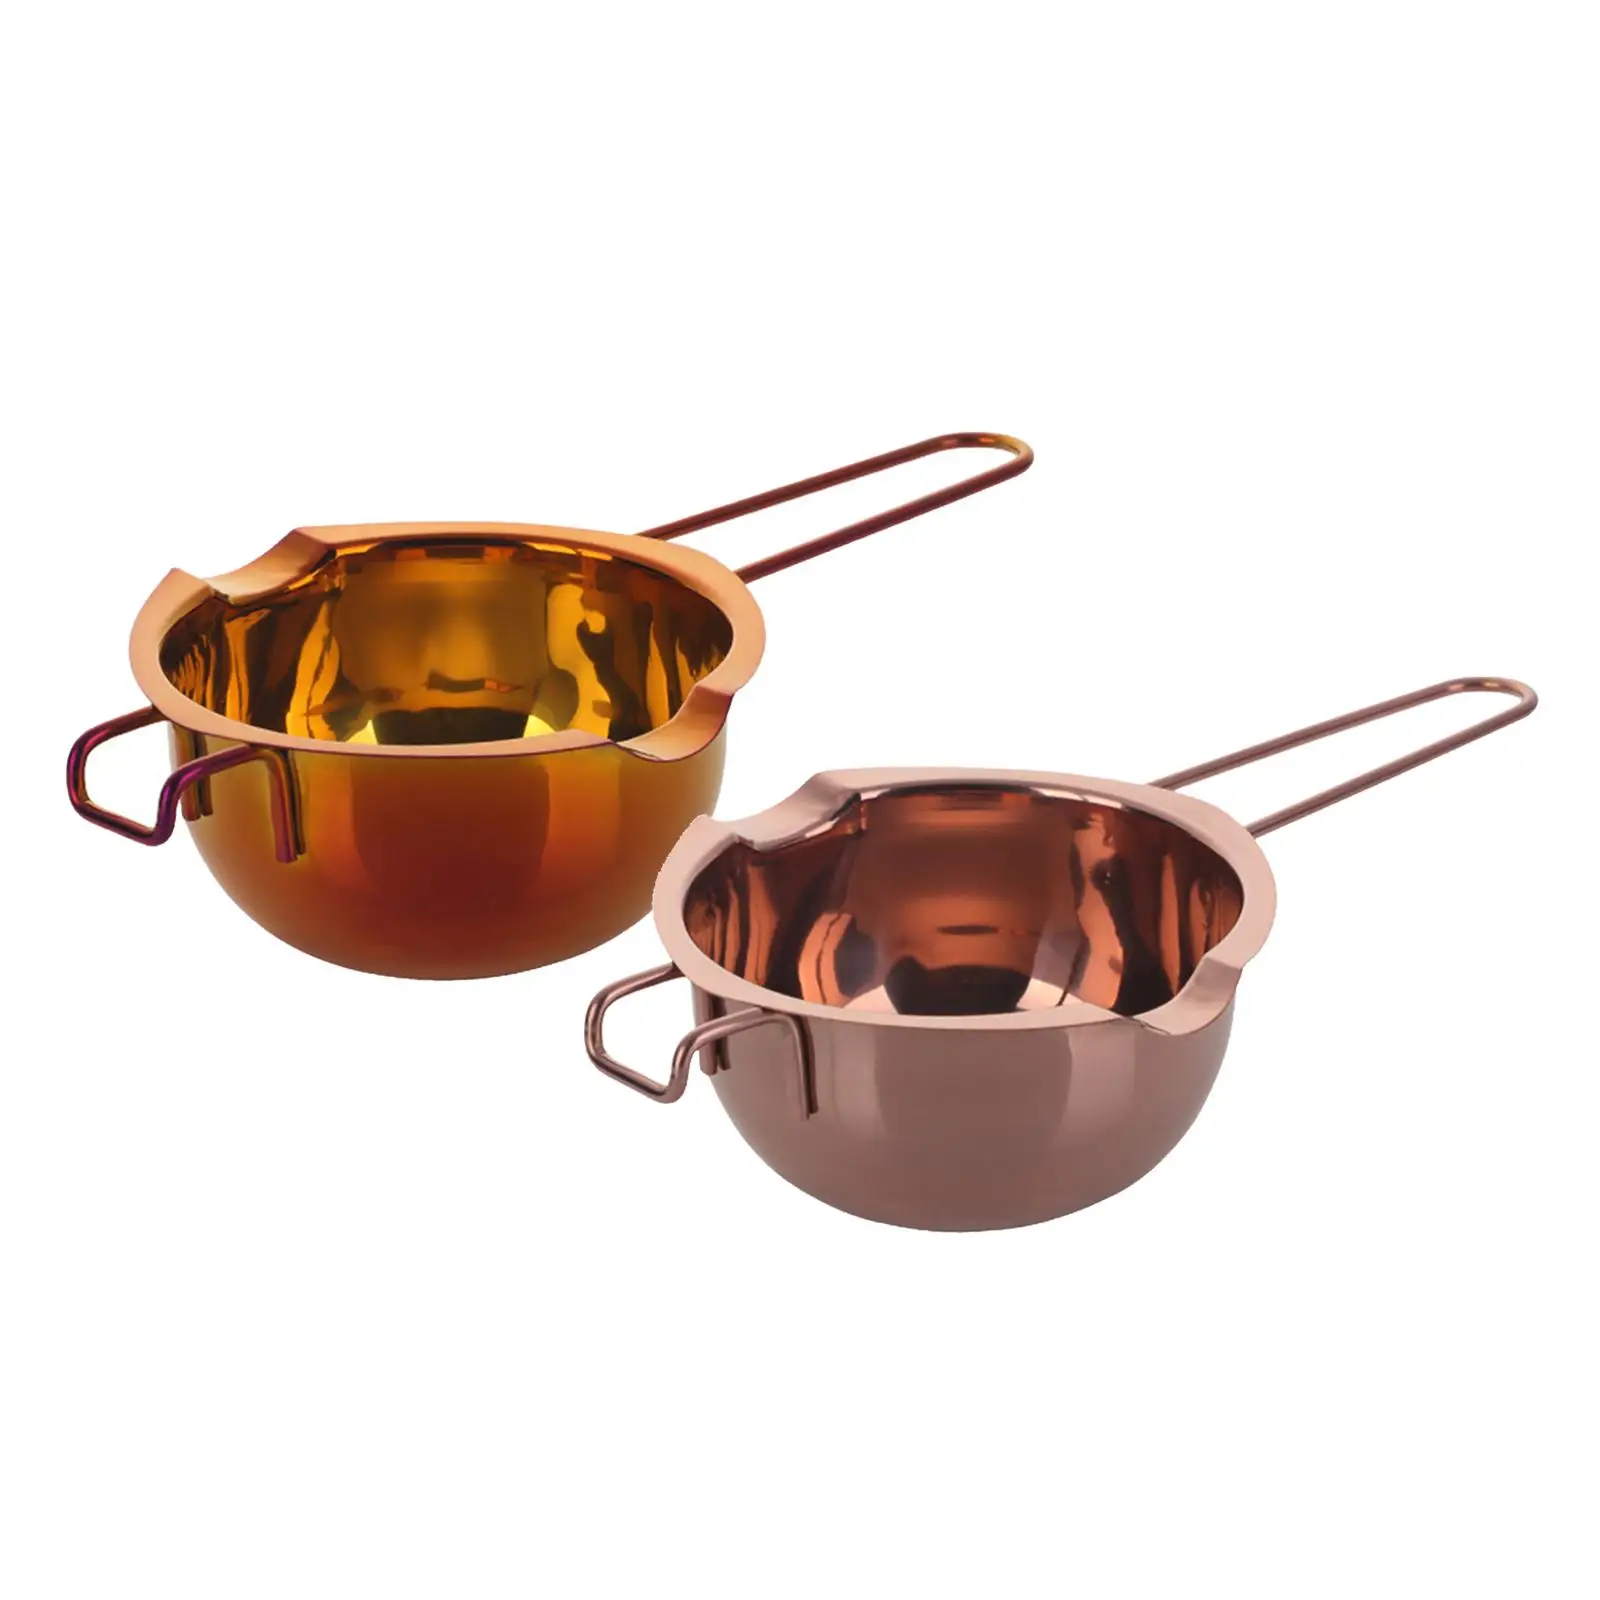 400ml Double Boiler Pot Melting Pot for Melting Chocolate, Candy, Candle ,Flat Bottom ,Long Handle-Protect Hands Durable Sturdy